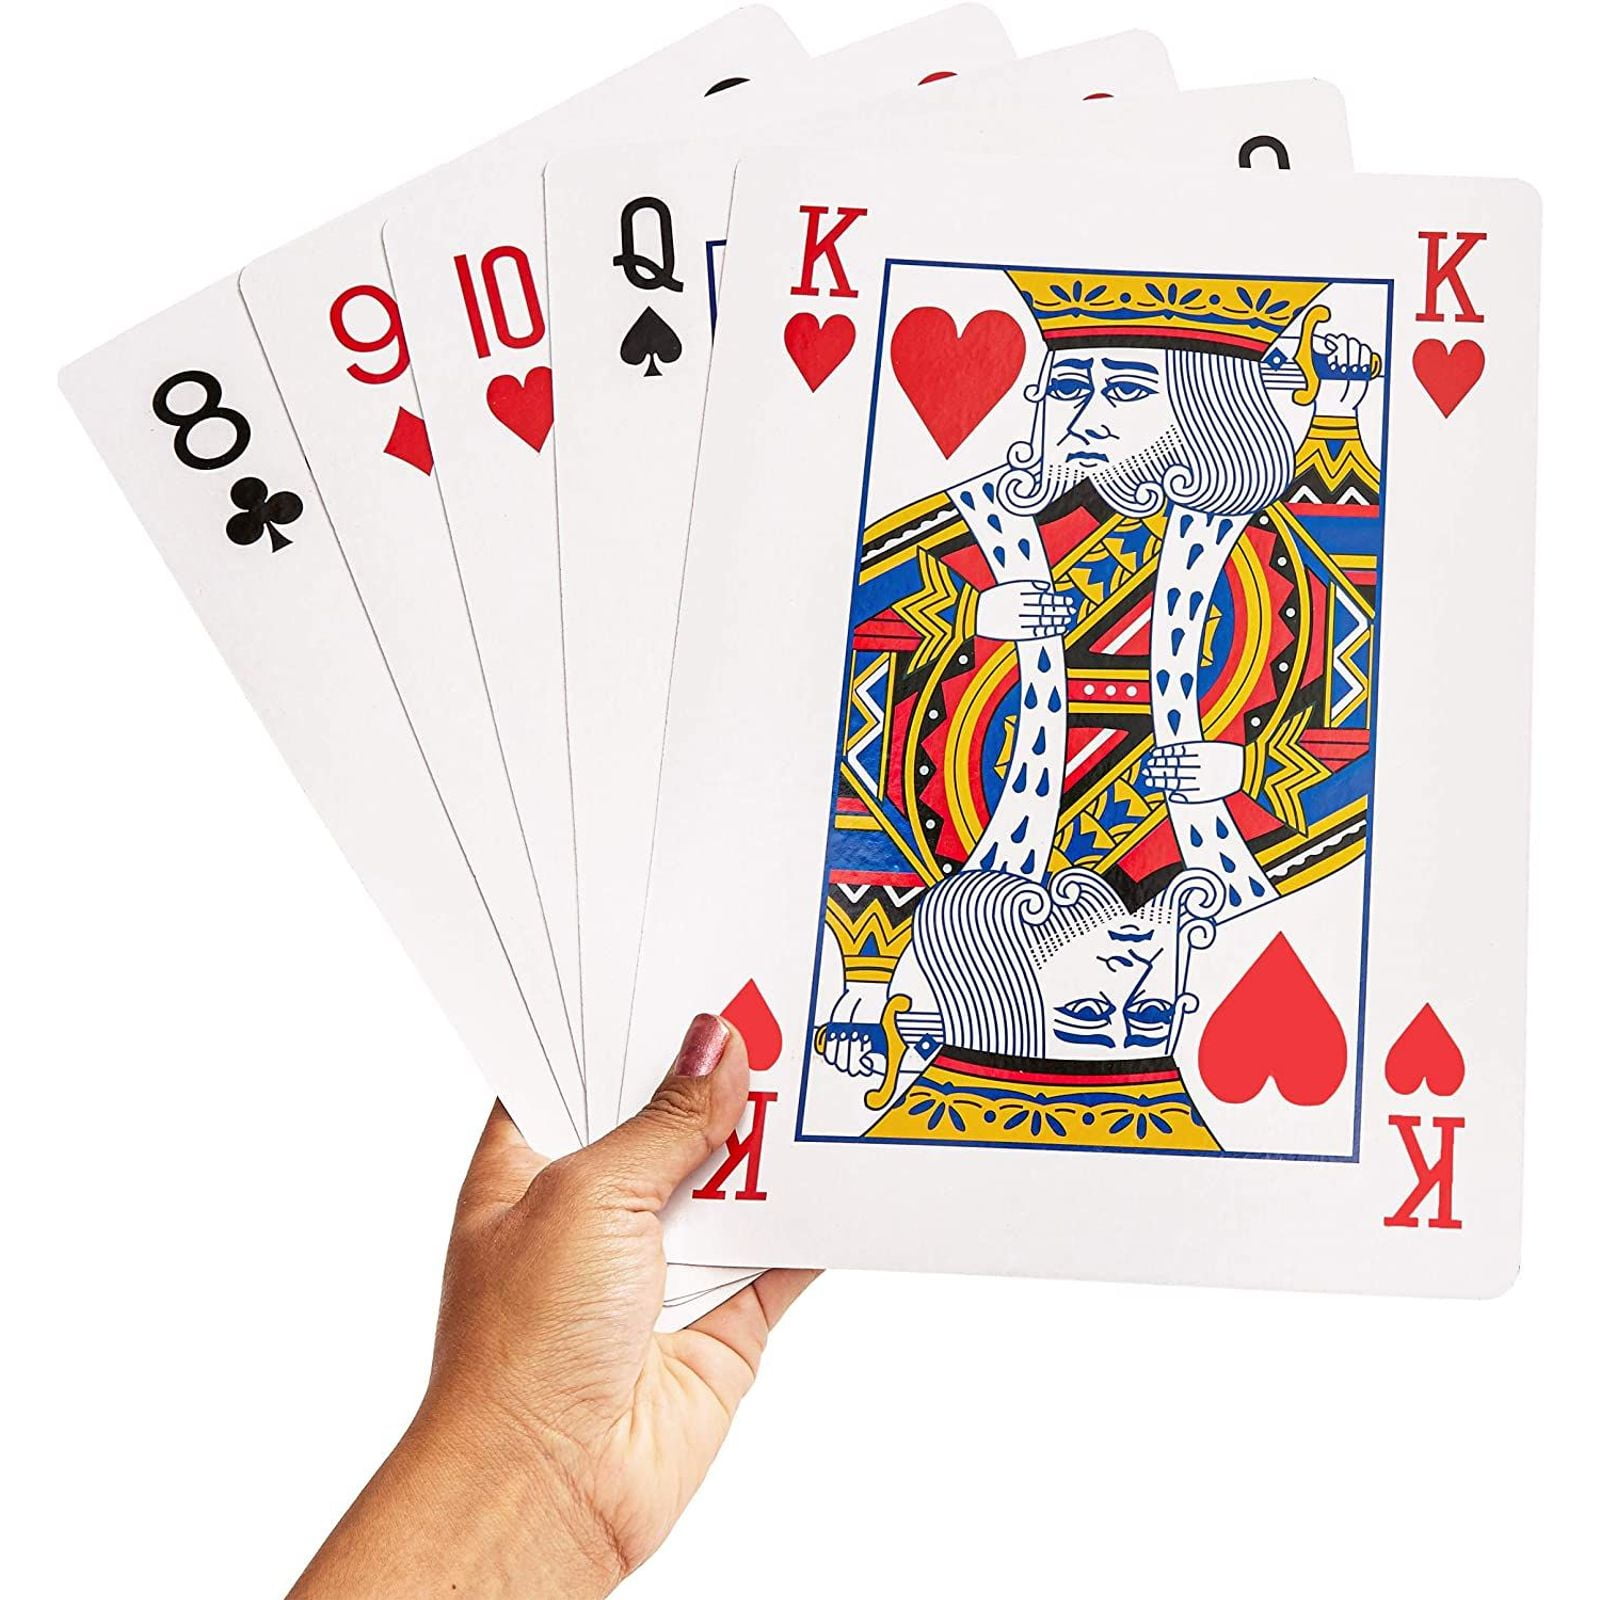 A4 Giant Jumbo Playing Cards Family Fun BBQ Games Party Deck Of 52 